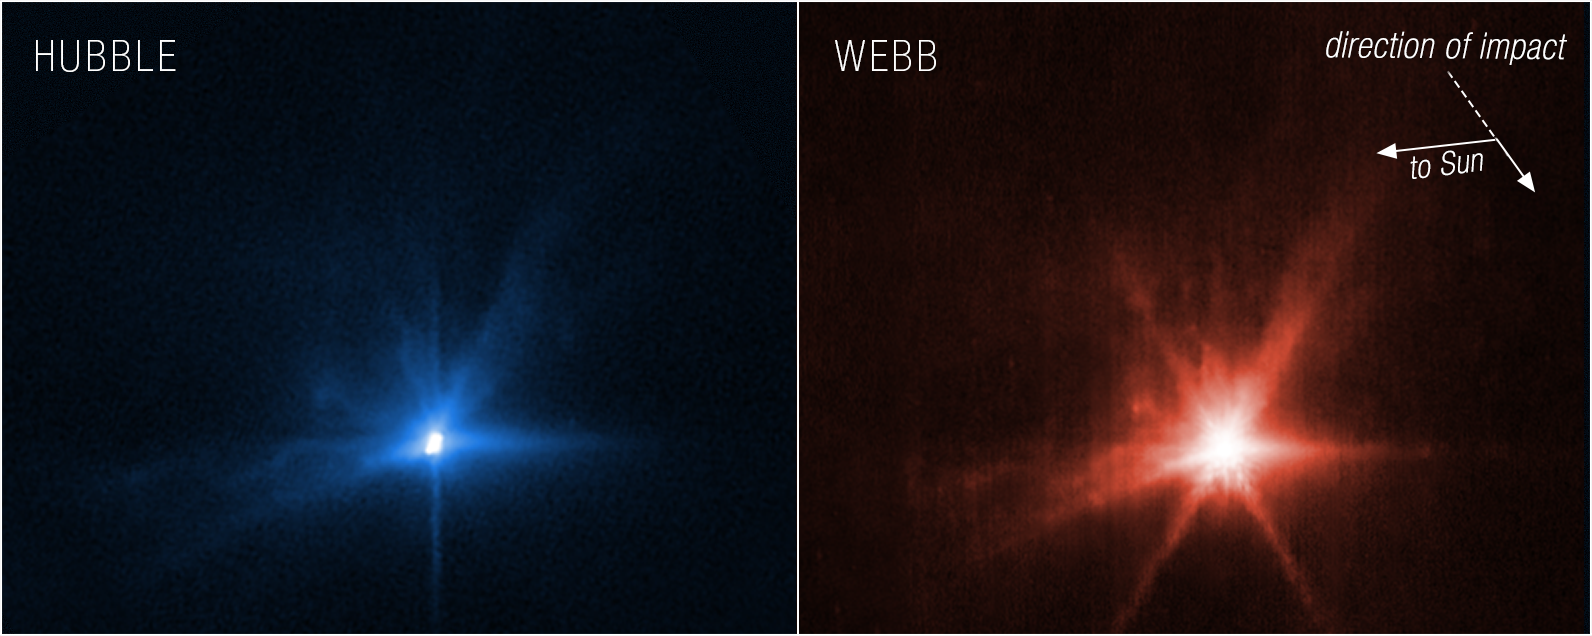 Views of Didymos-Dimorphos asteroid system after DART impact. Hubble's (left) shows a bright, white-blue center and streaks of darker blue emanating outward. Webb's red-hued view (right) is similar to Hubble's, with features appearing brighter overall.